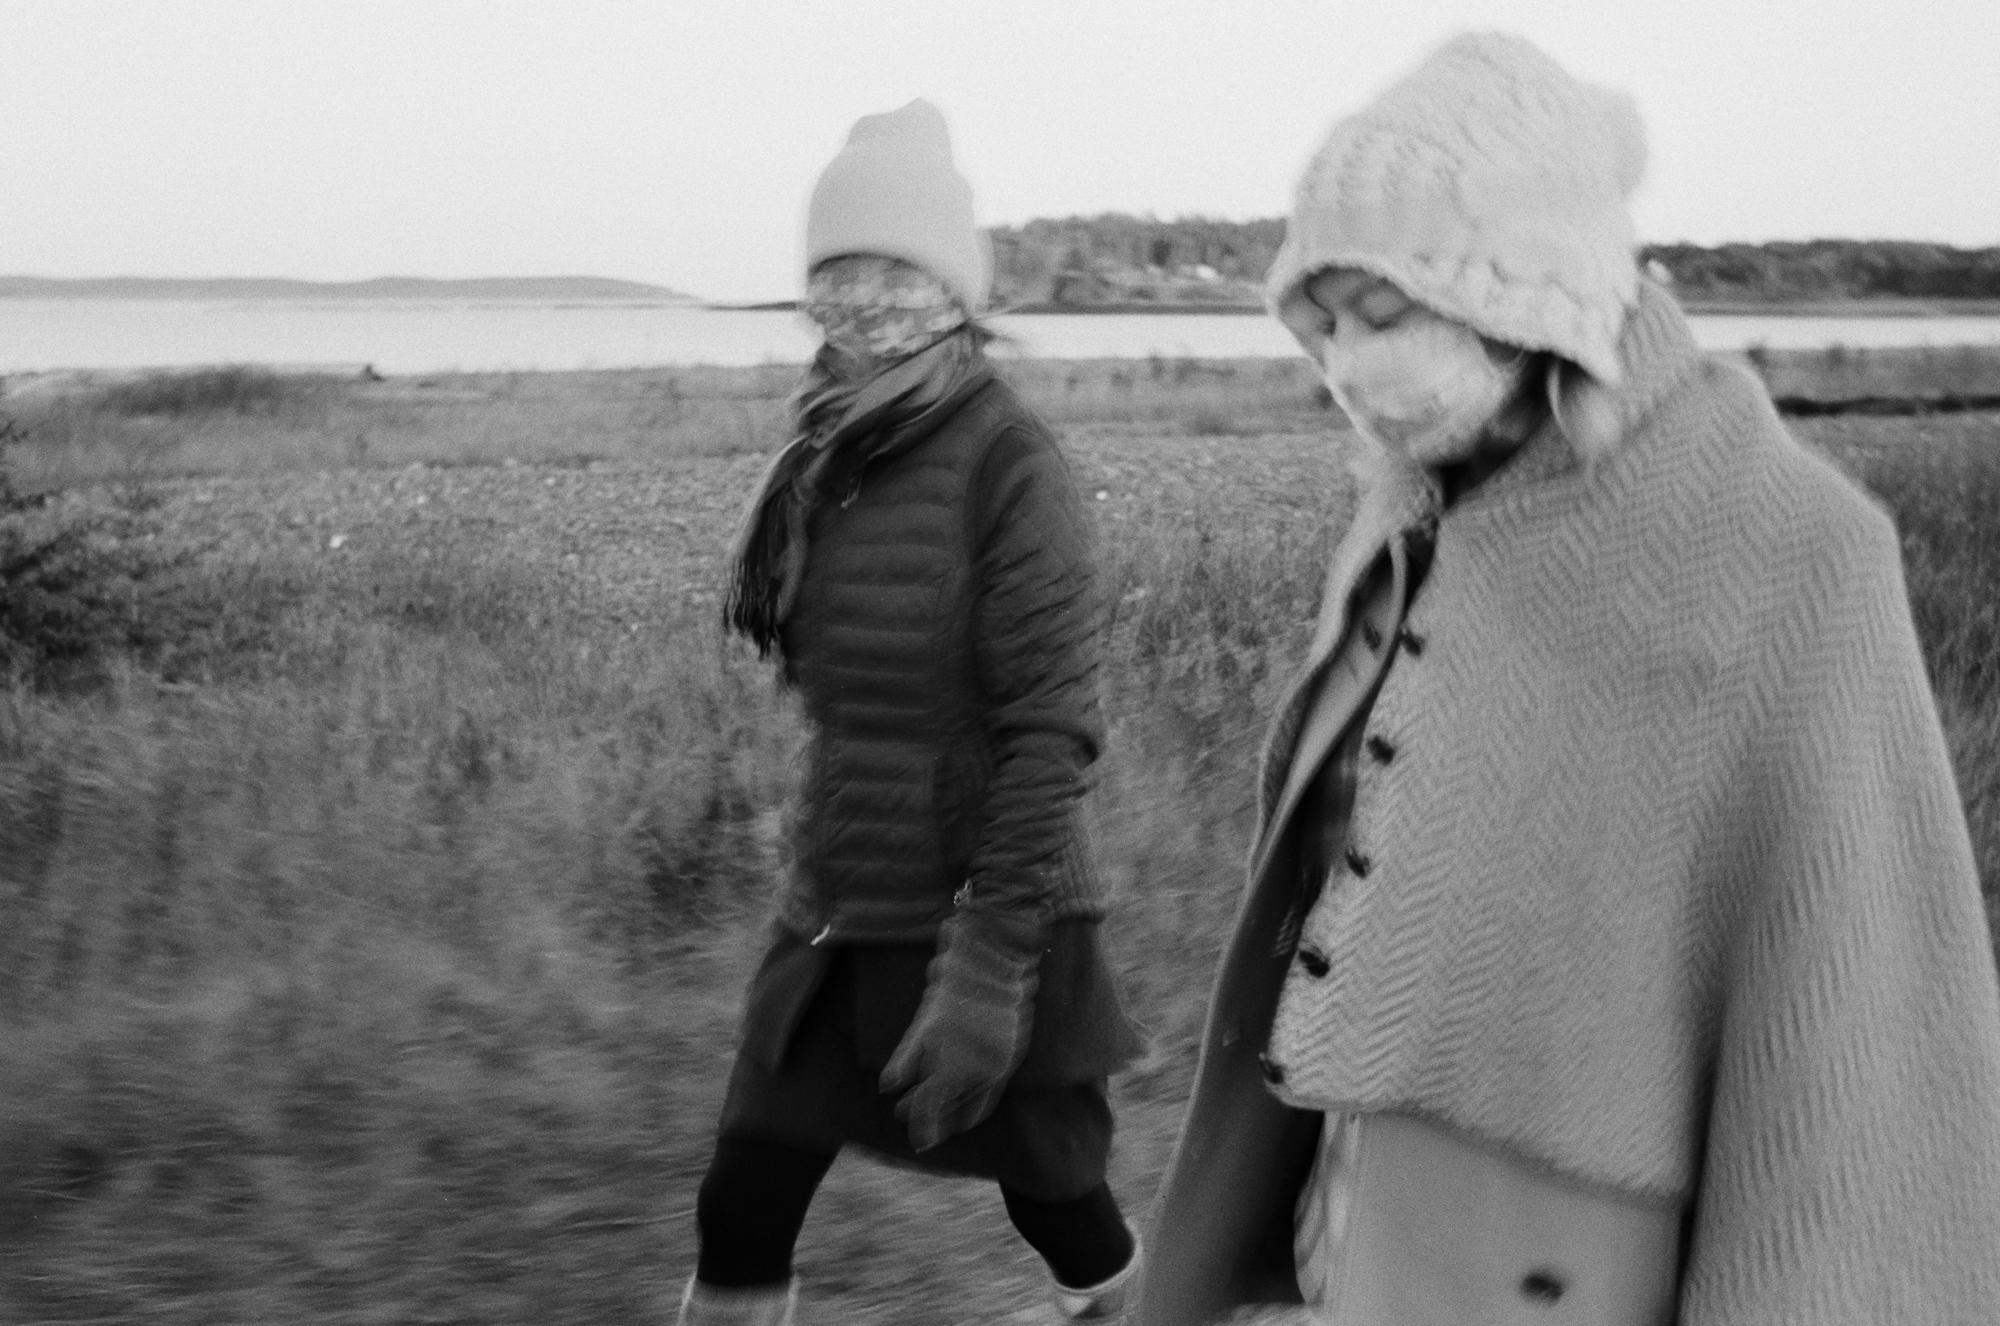 Katherine In Covid - Walking with her mom KwiNam, on an island during low tide...